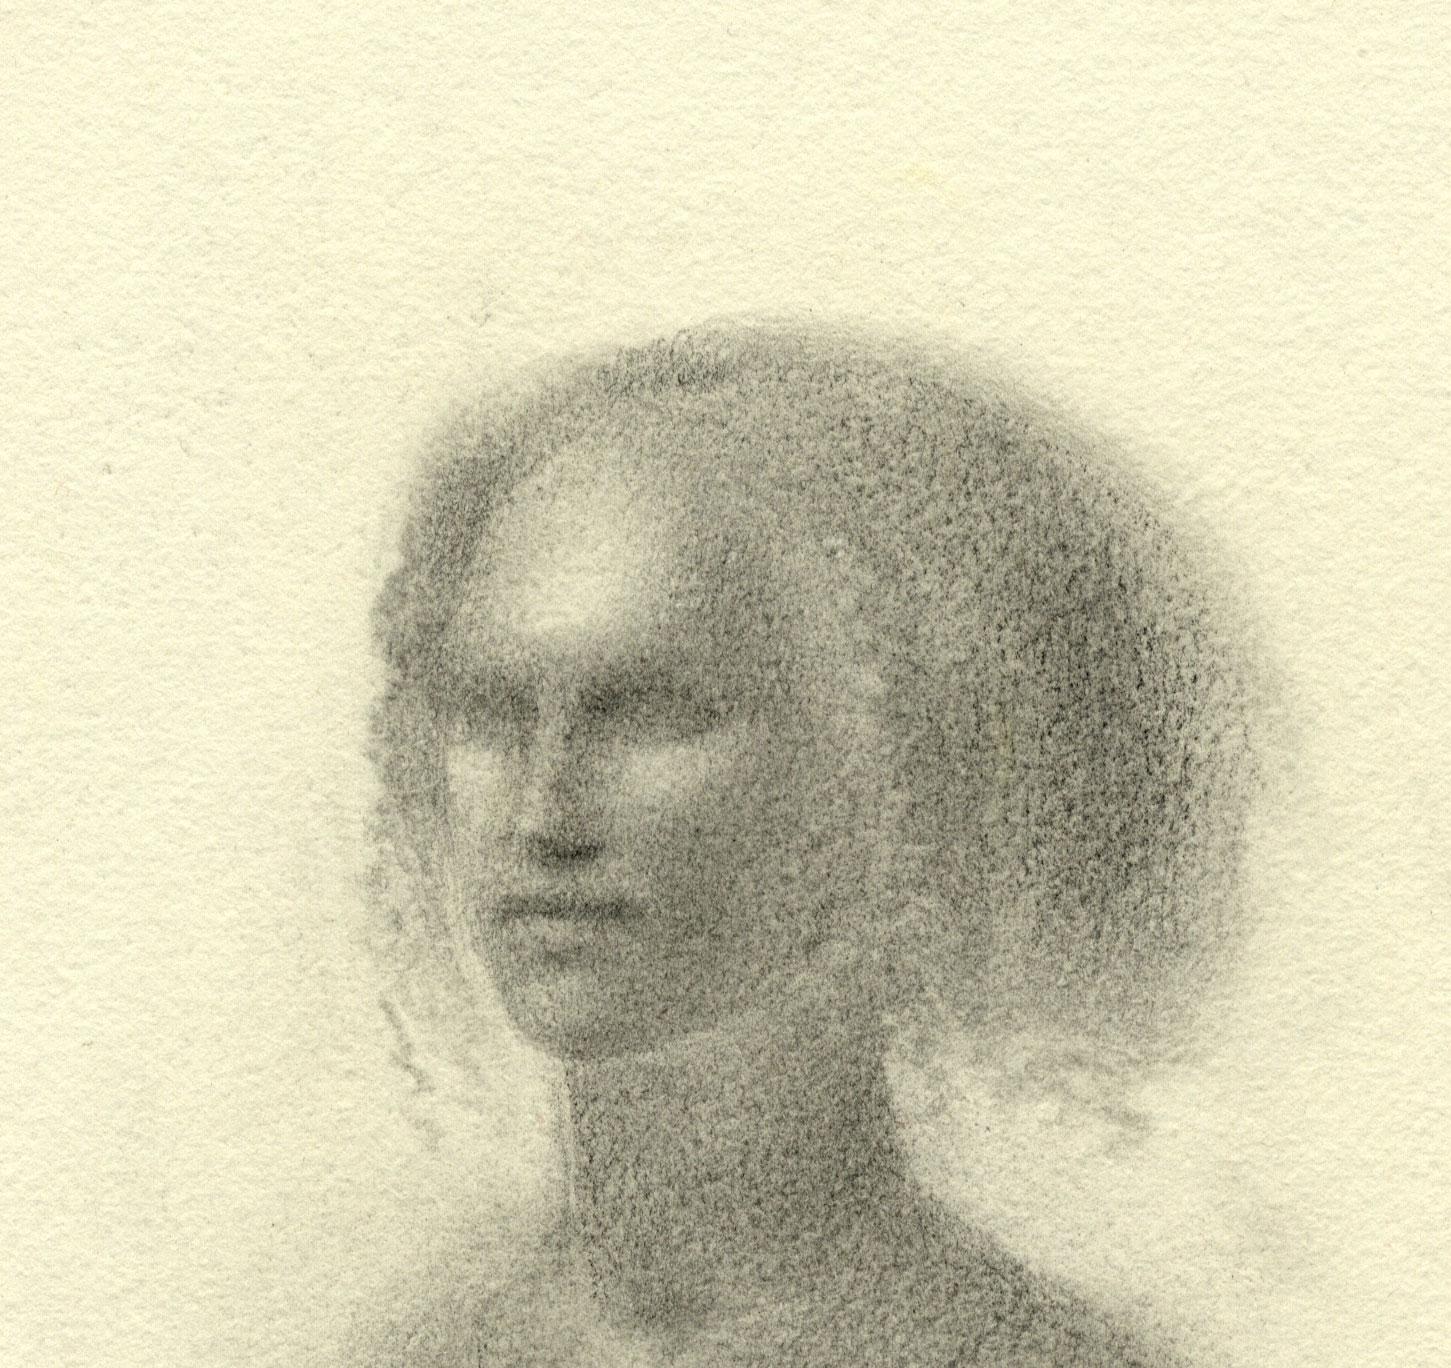 Small Head (delicate pencil drawing of a young woman) - Art by Martha Erlebacher